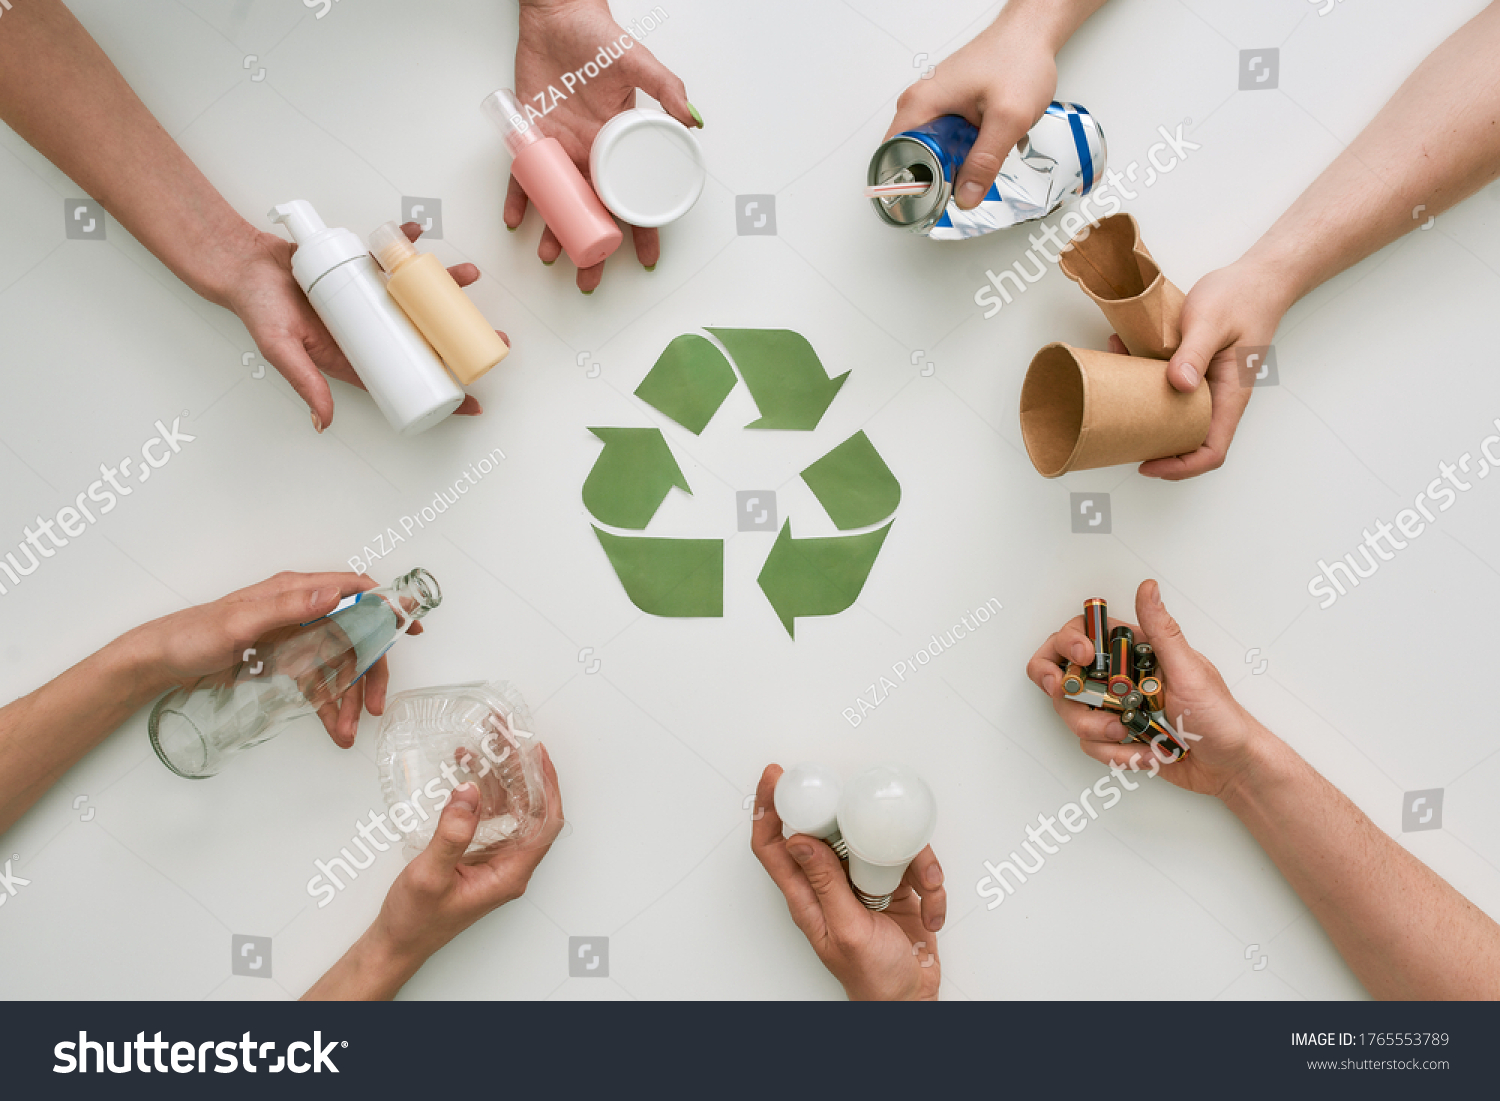 Top view of many hands holding different waste, garbage types with recycling sign made of paper in the center over white background. Sorting, recycling waste concept. Horizontal shot. Top view #1765553789